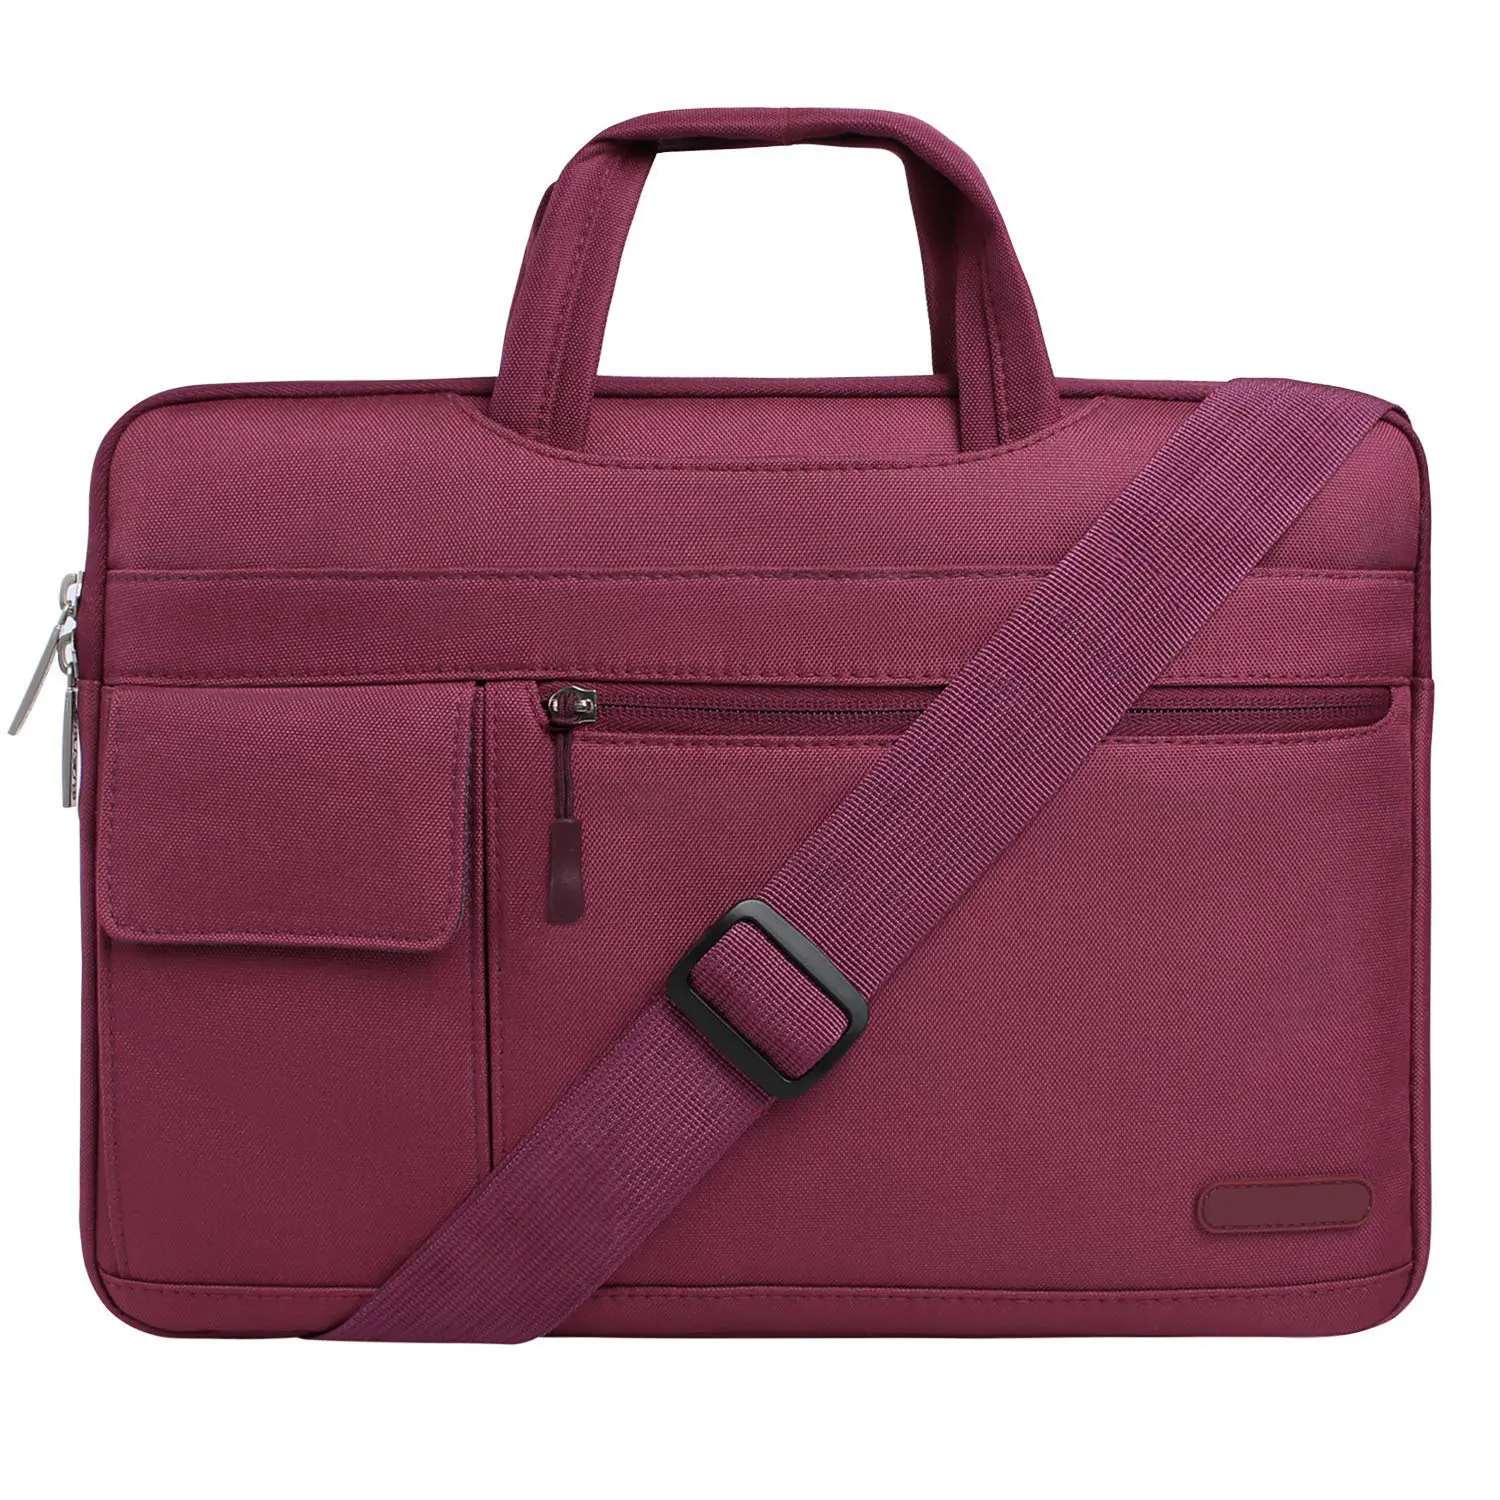 Custom portable padded compartment purple laptop women's case cum office handbags briefcase bag for laptop and documents